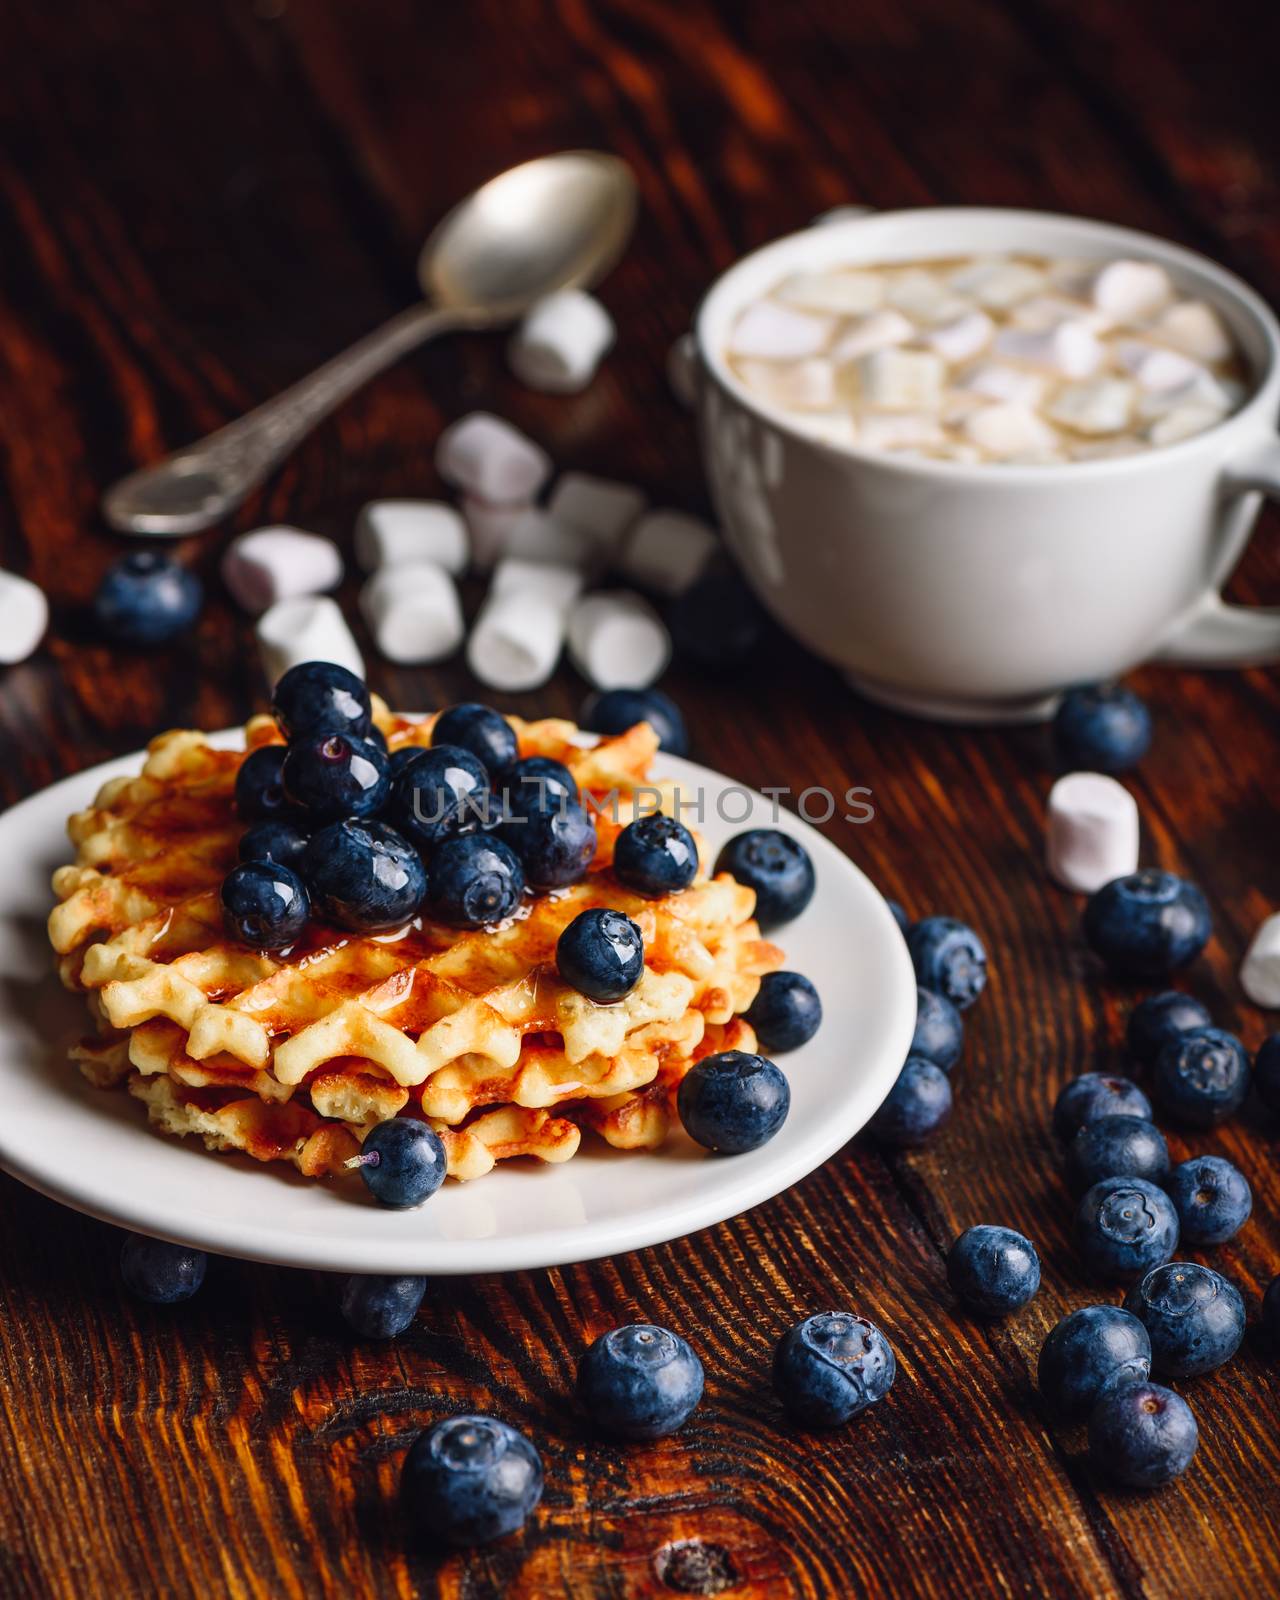 Waffles with Fresh Blueberry and Honey on Plate, Cup of Cocoa with Marshmallow.Vertical Orientation.